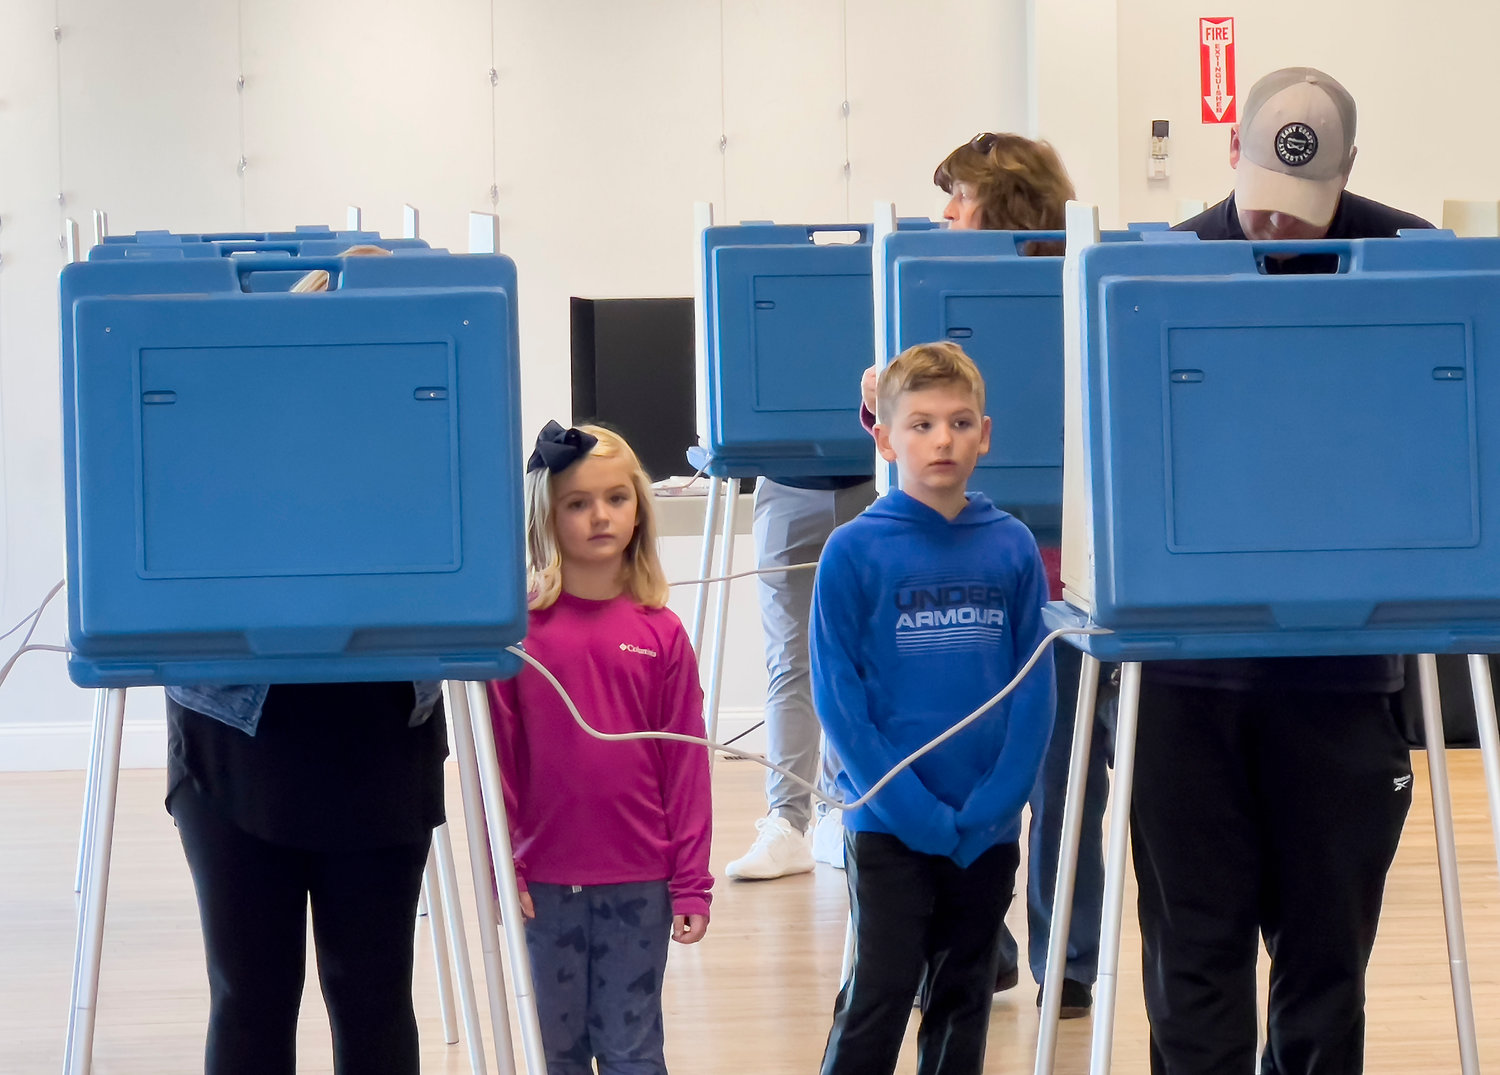 Kora Brule, 6, and her brother Roman, 8, wait patiently as their parents, Britt and Jason Brule, vote at The CFP Arts, Wellness and Community Center in Common Fence Point Tuesday morning.